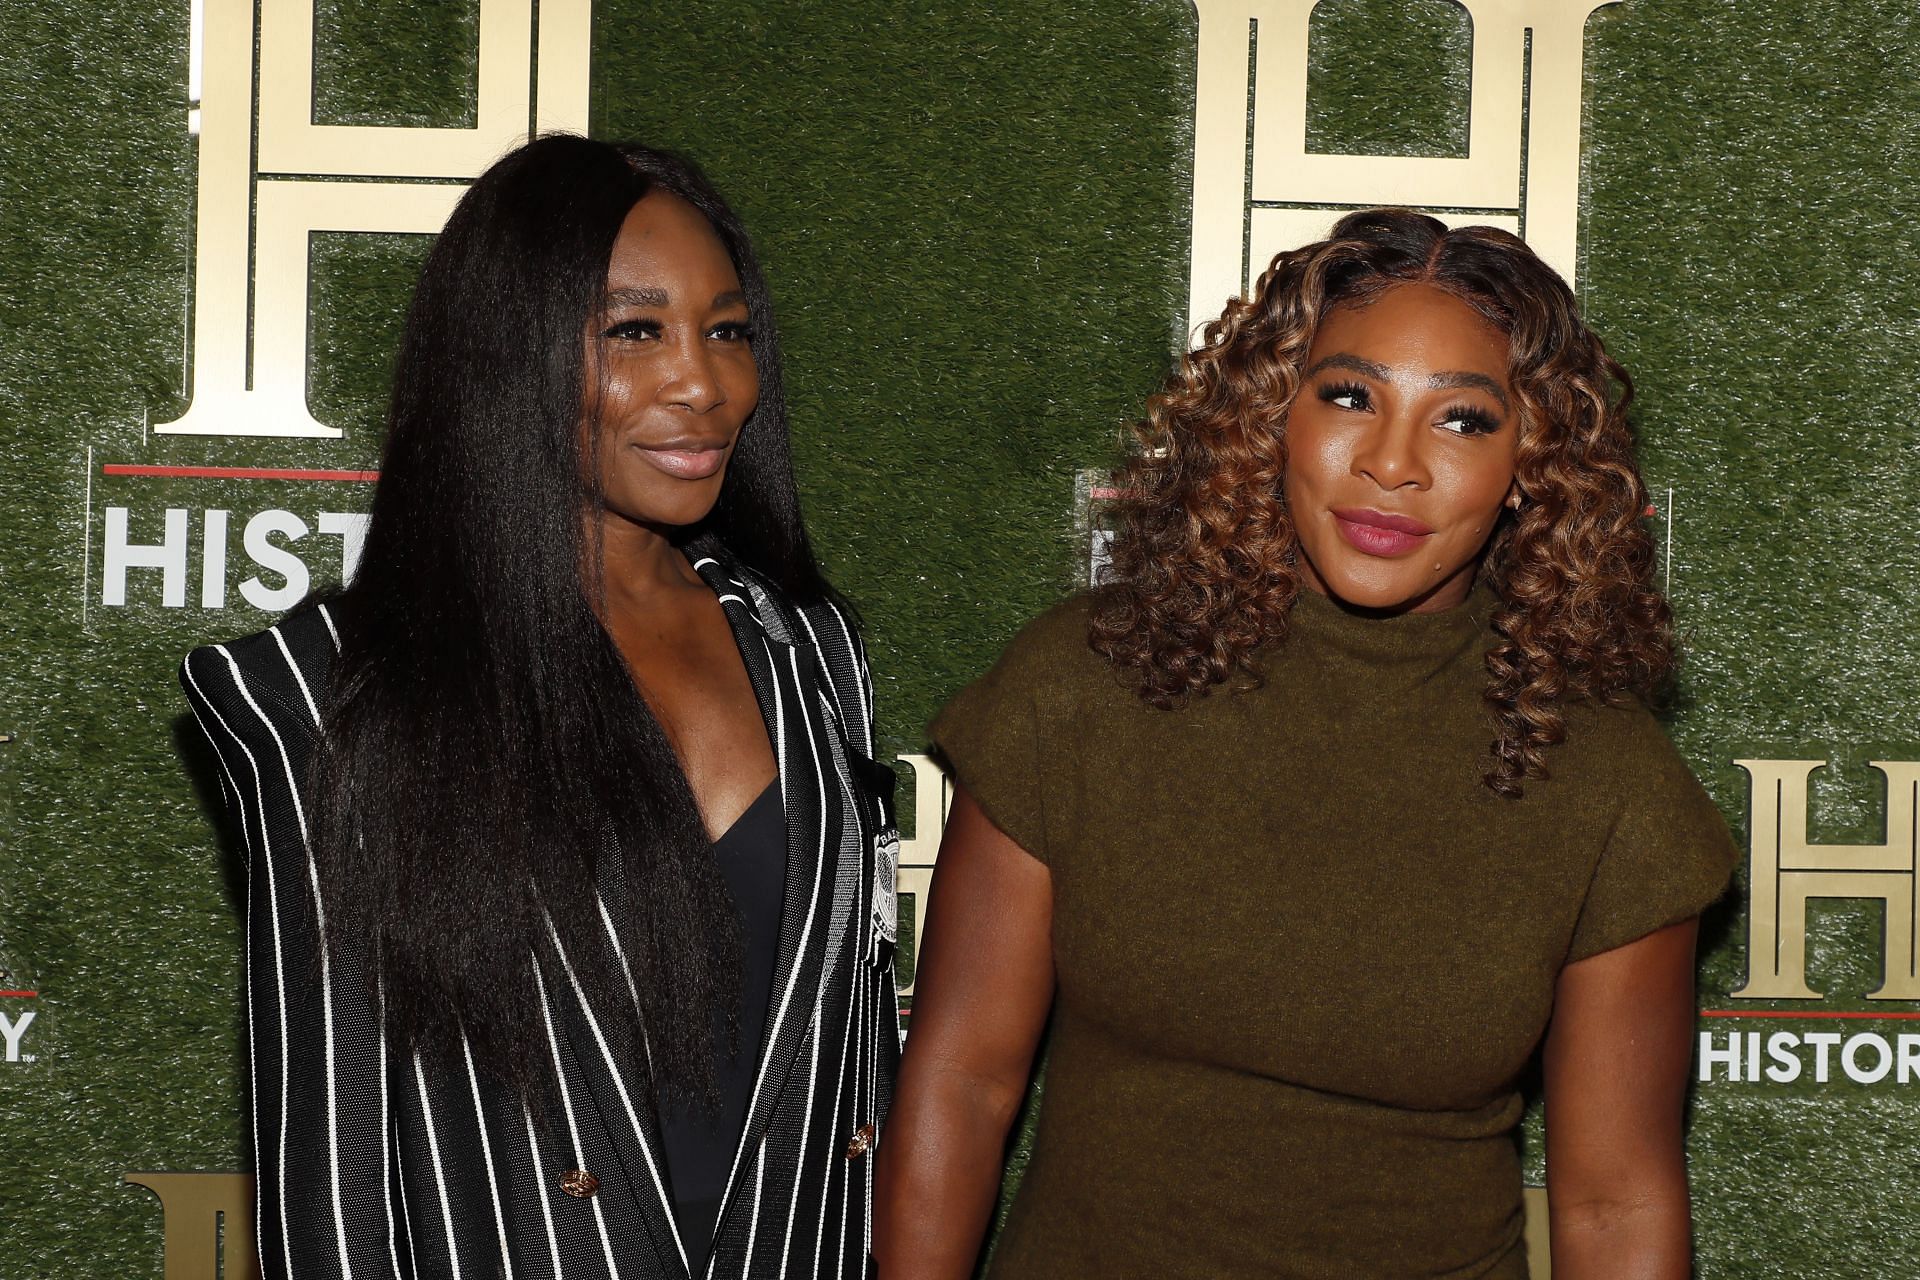 Williams sisters attend 2022 history lecture